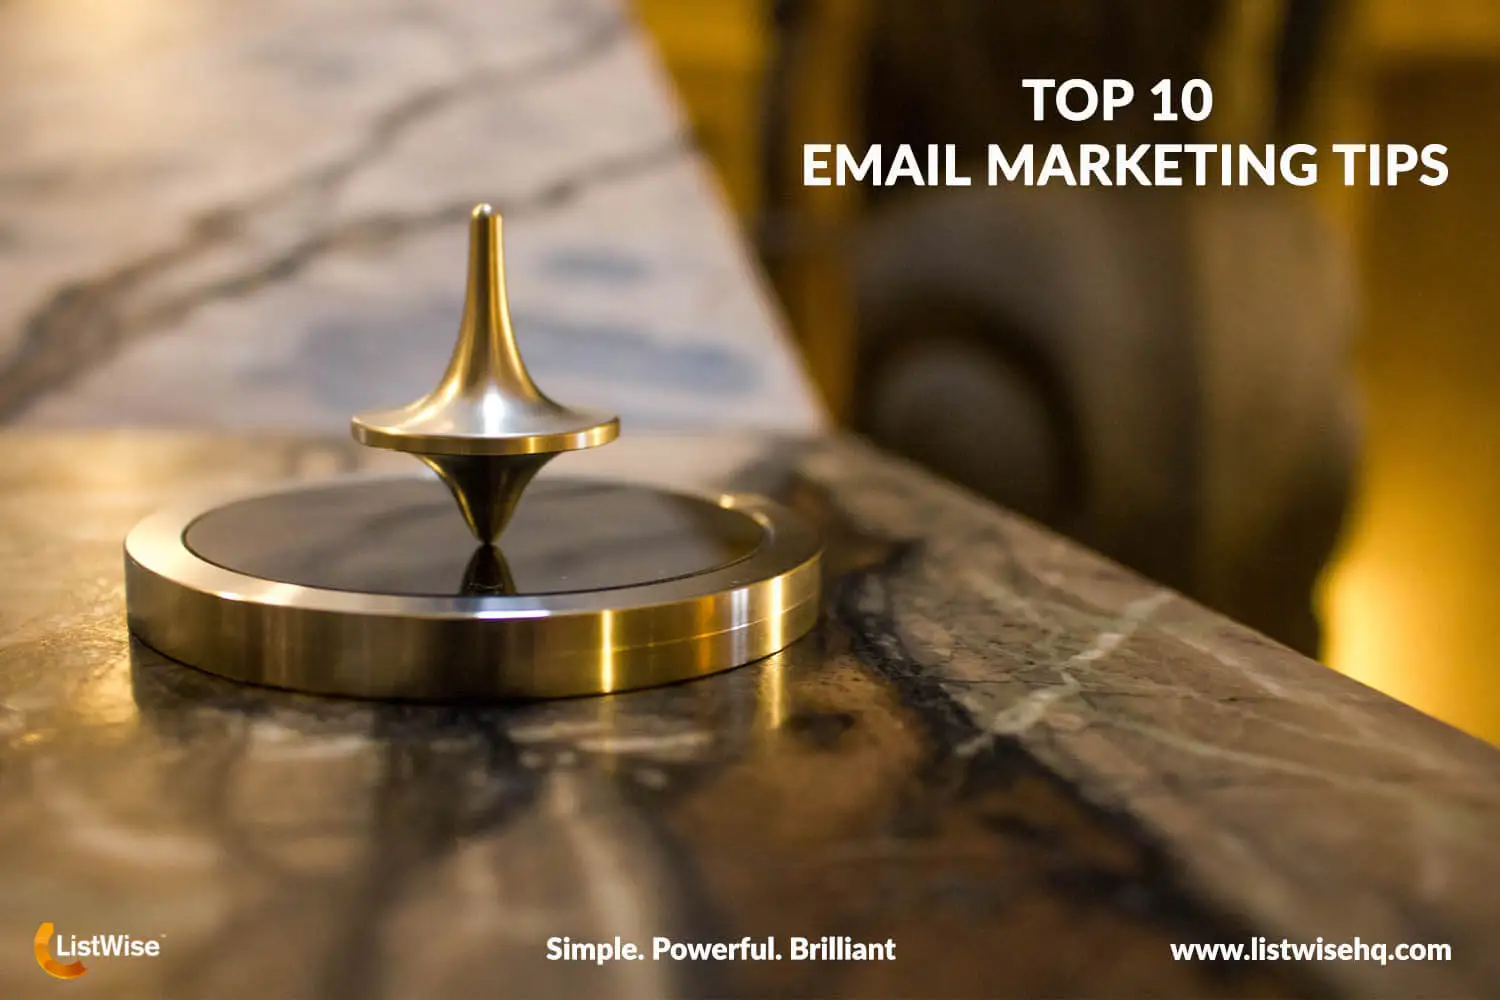 Top 10 Email Marketing Tips